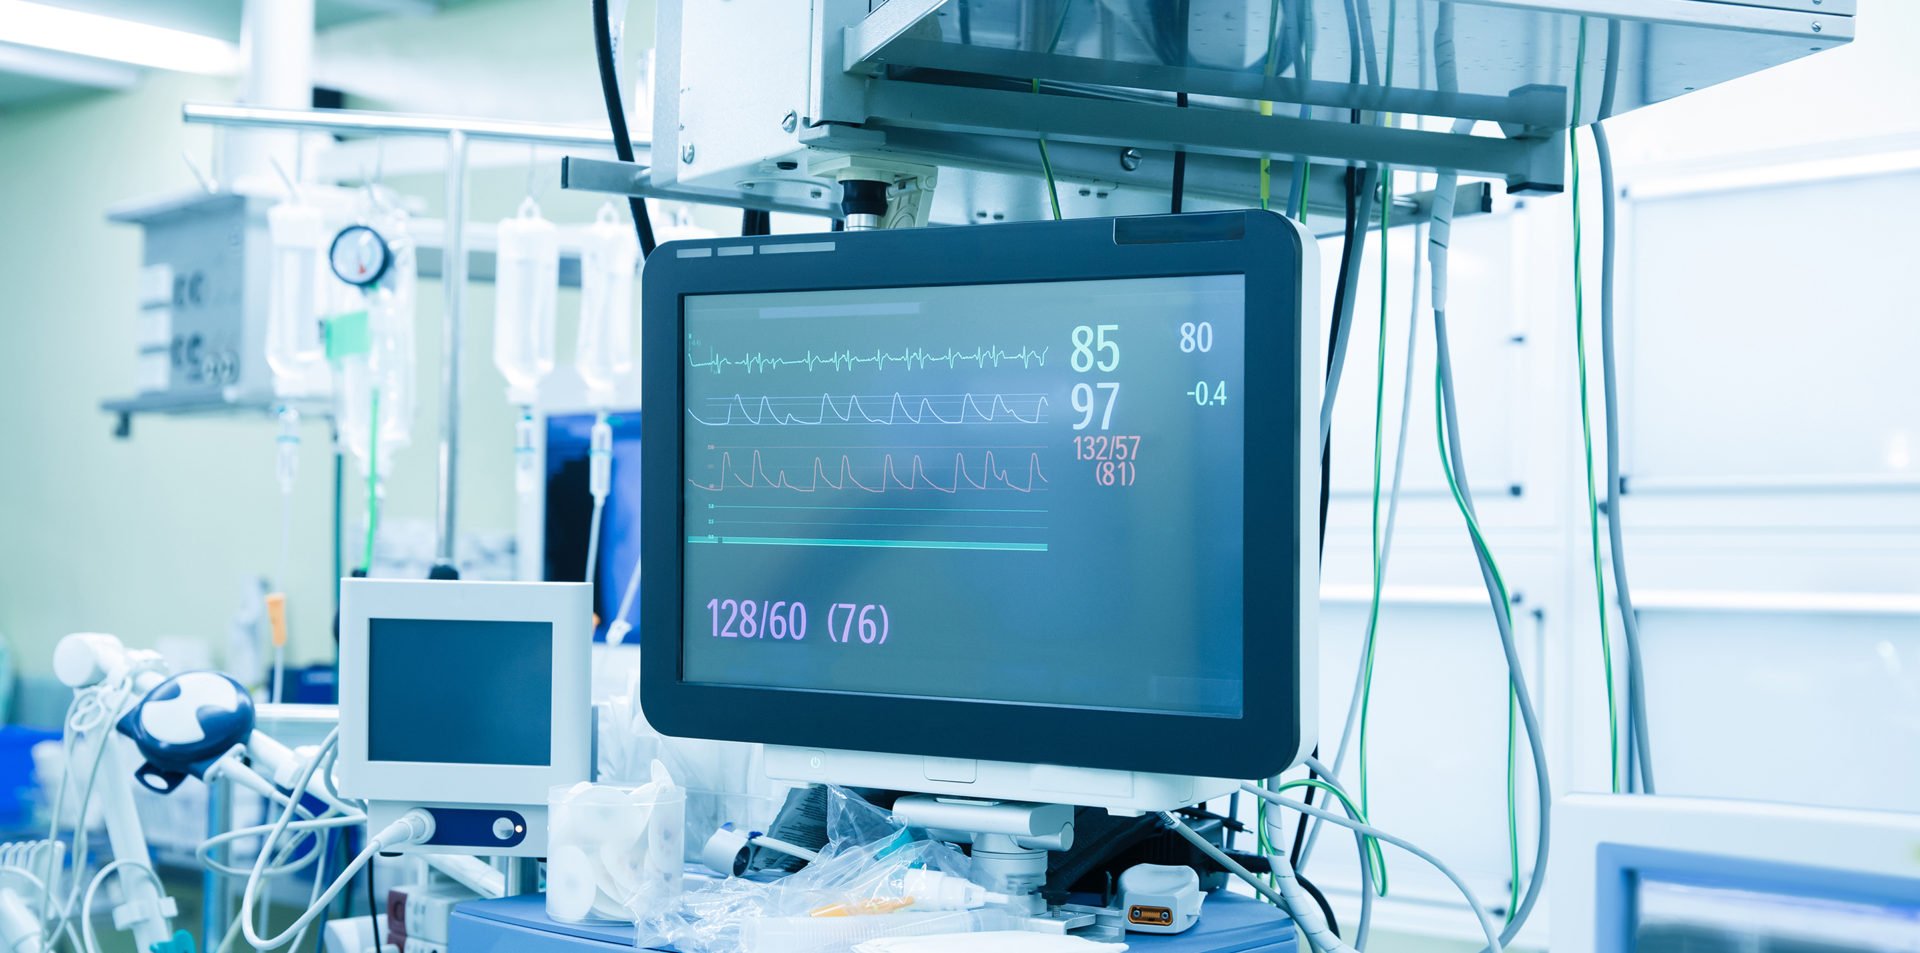 Functional vital functions (vital signs) monitor in an operating room with machines in the background, during real surgery on a patient. Life sustainment, monitoring and anesthesia concept.